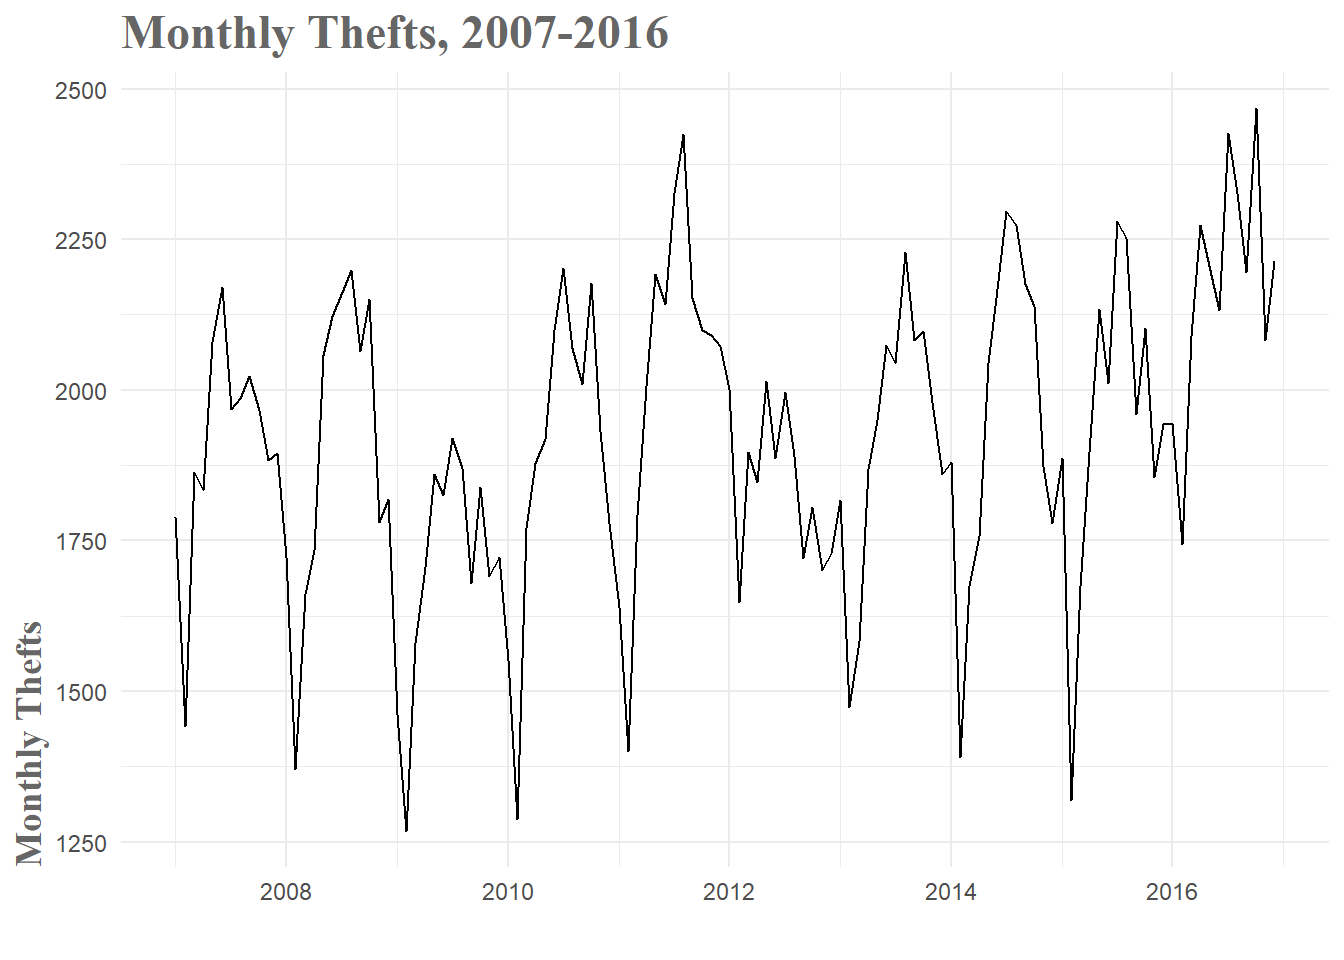 Monthly Thefts Time Series